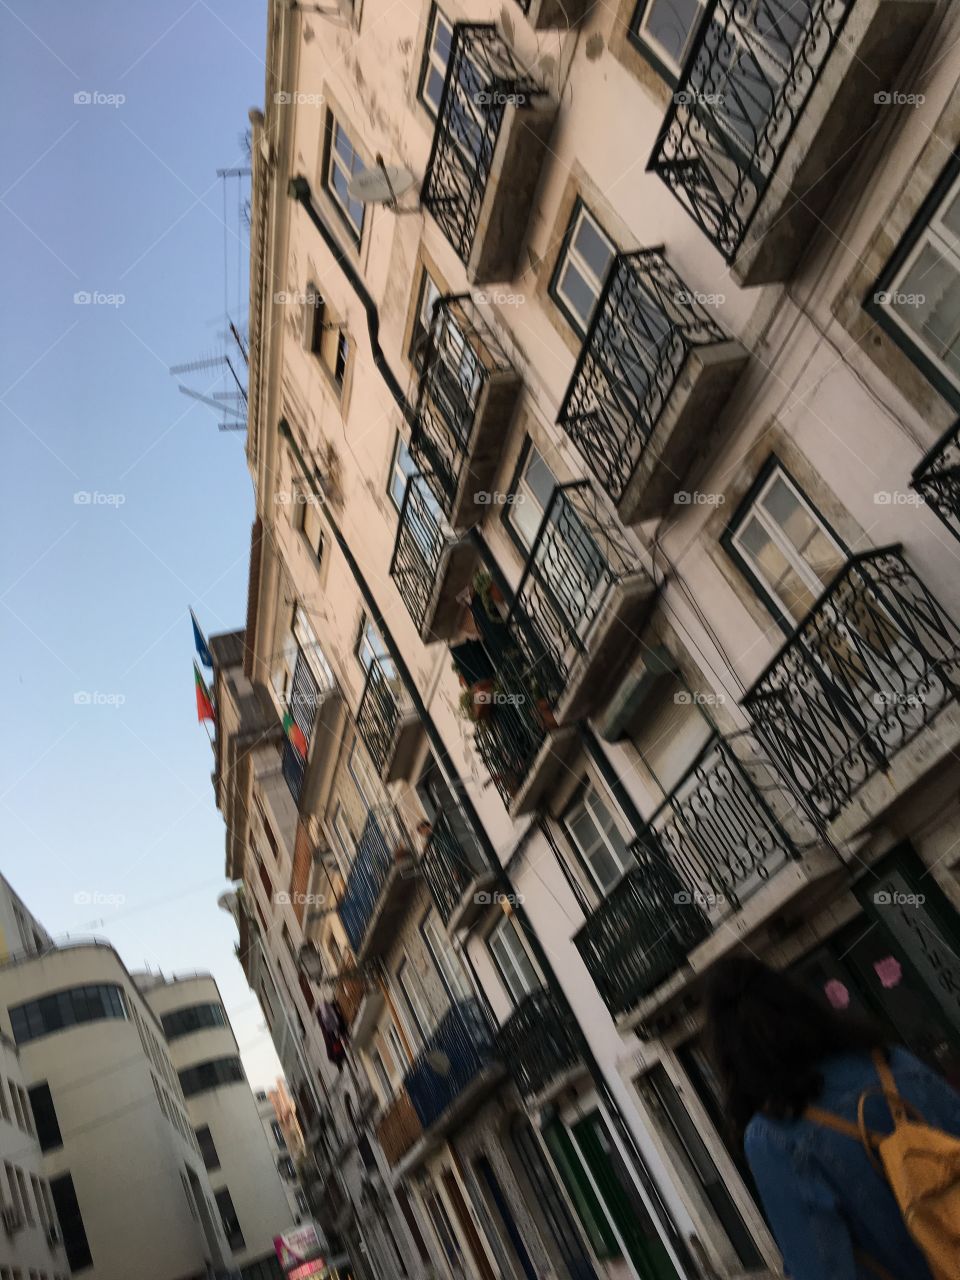 Black balconies on a fasad of a building in Lisbon 